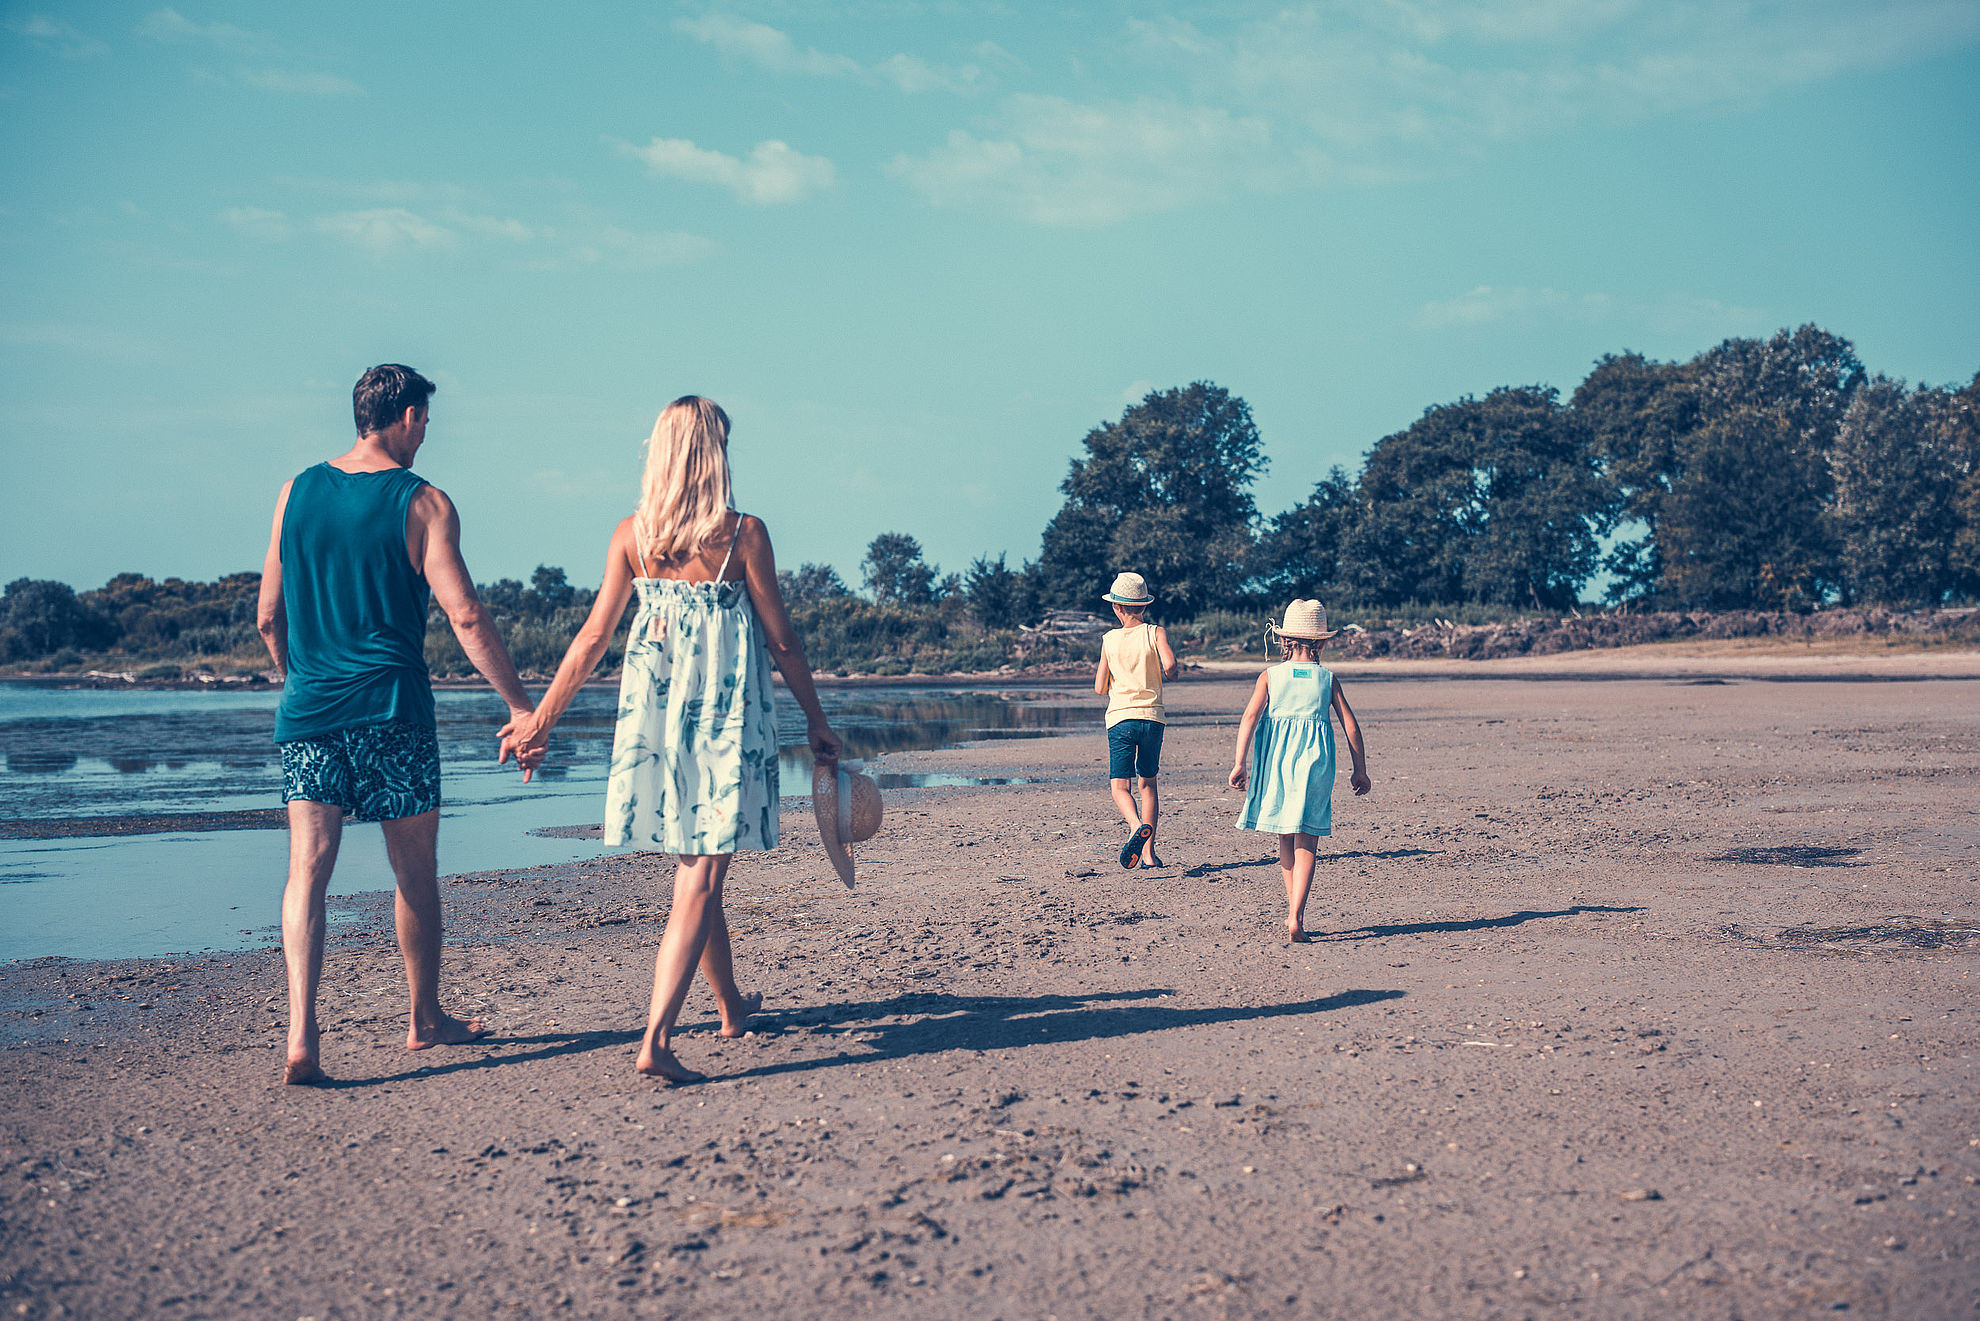 Walk on the beach with the family at low tide